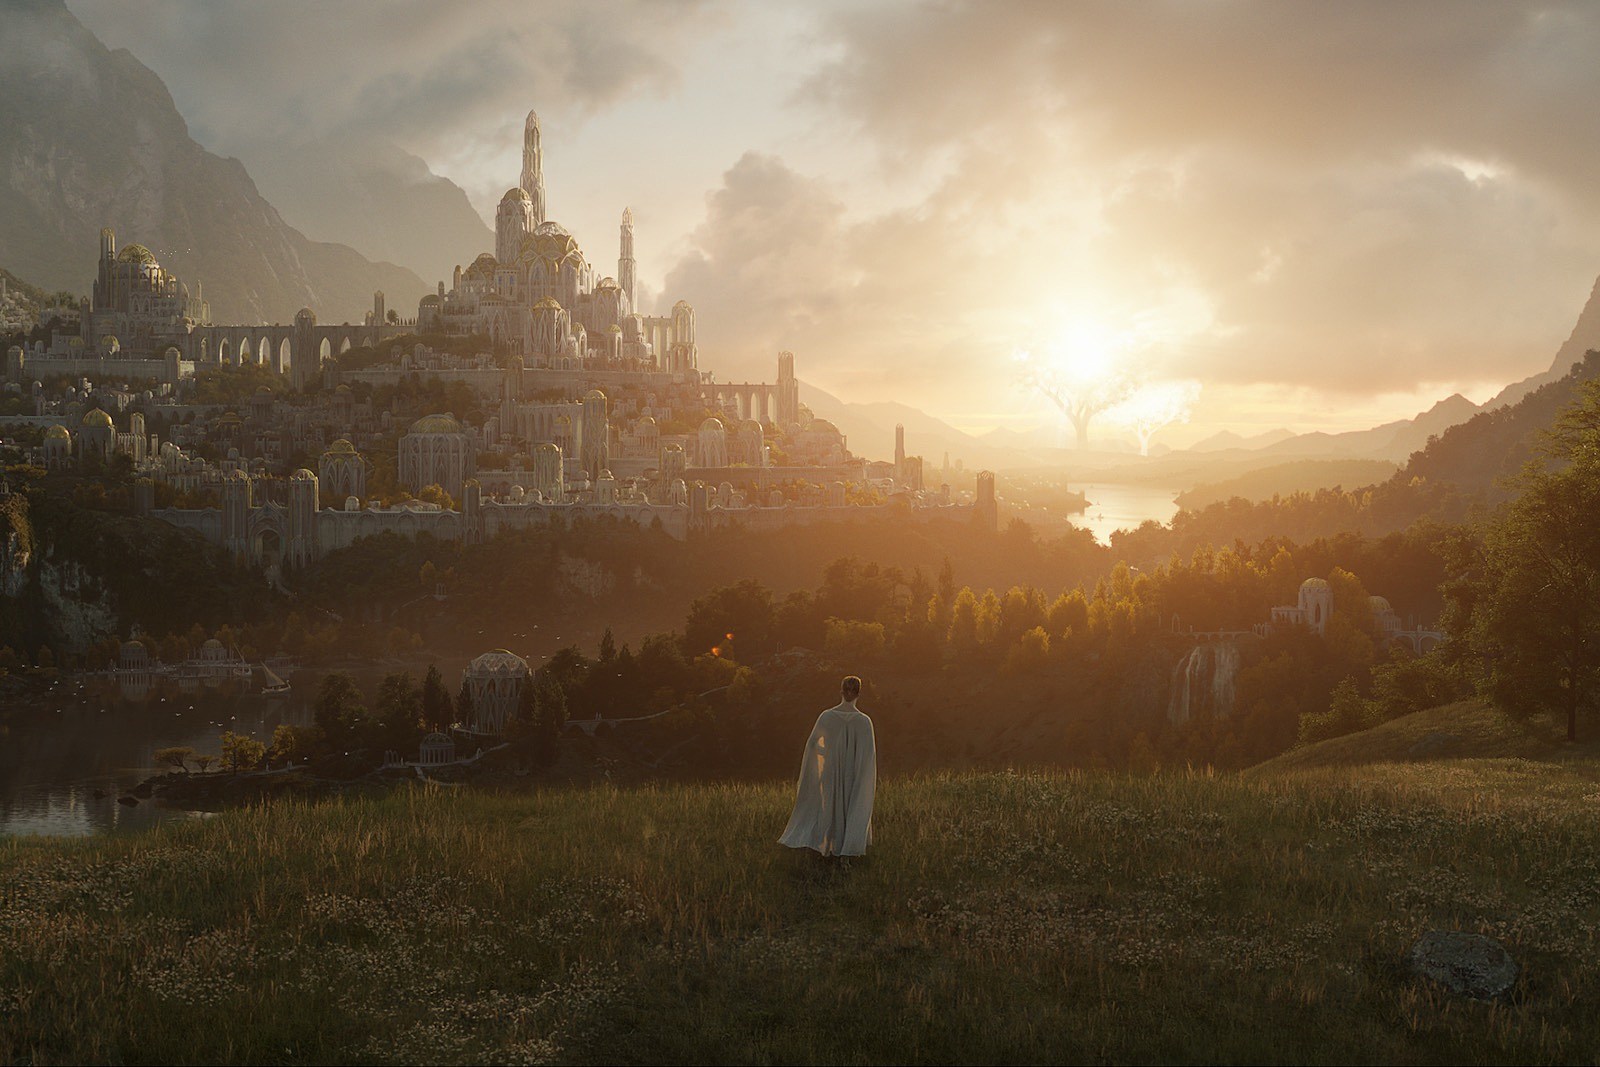 Lord of the Rings' TV Show Reveals Full Title and Premise